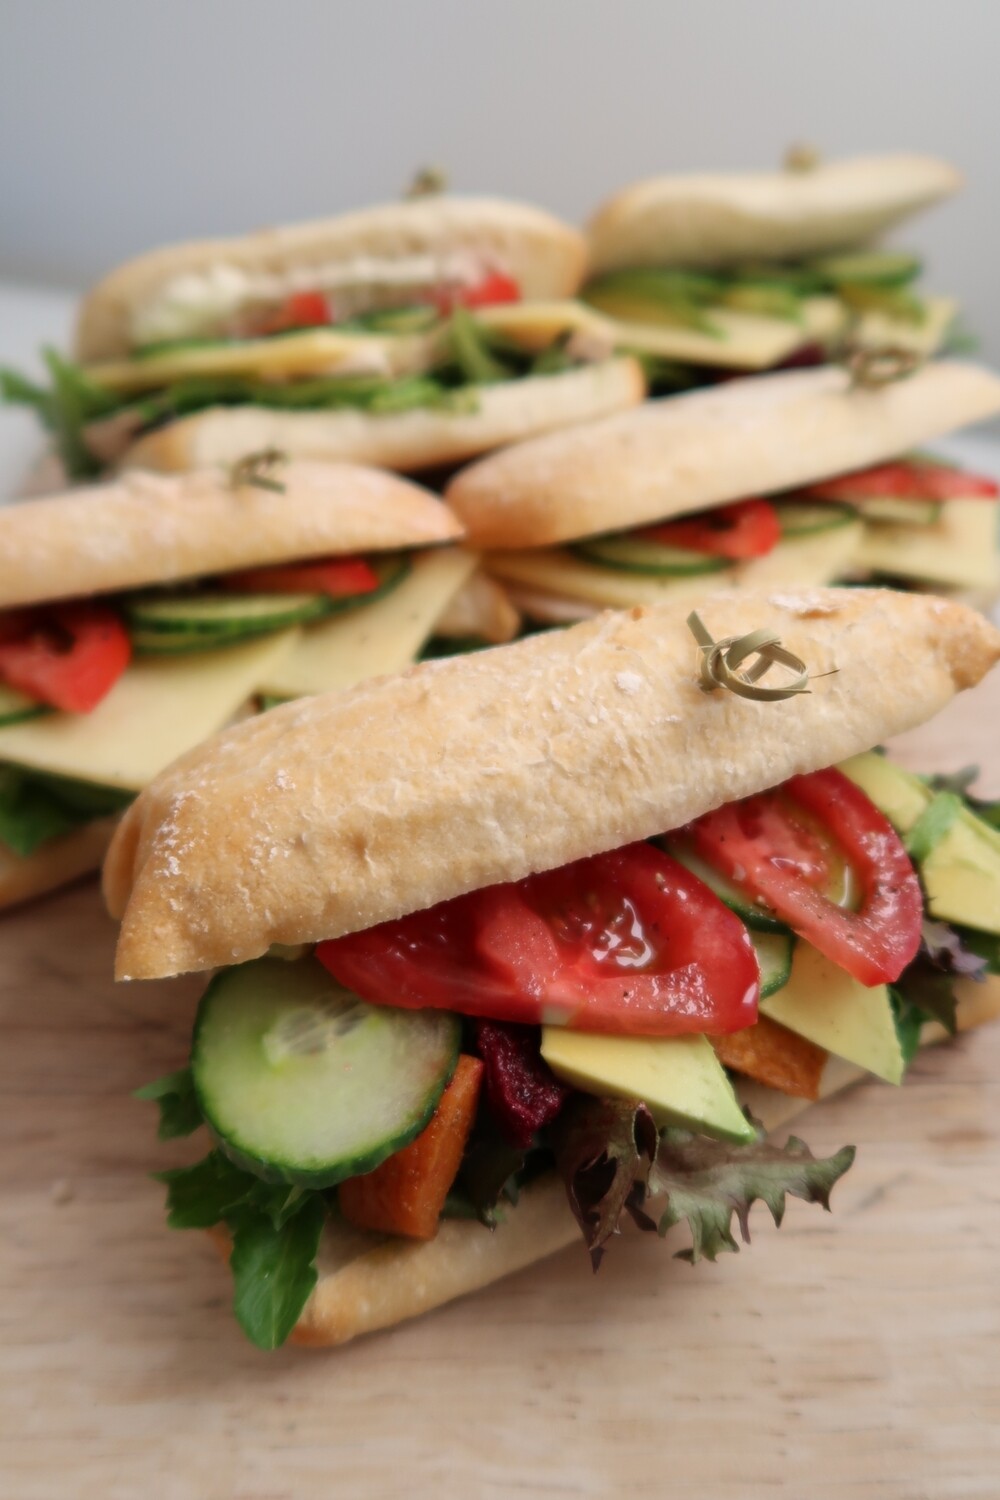 DIY CIABATTA POCKET: freshly baked, filled with organic salad greens, cucumber, tomato and your choice spread and filling.